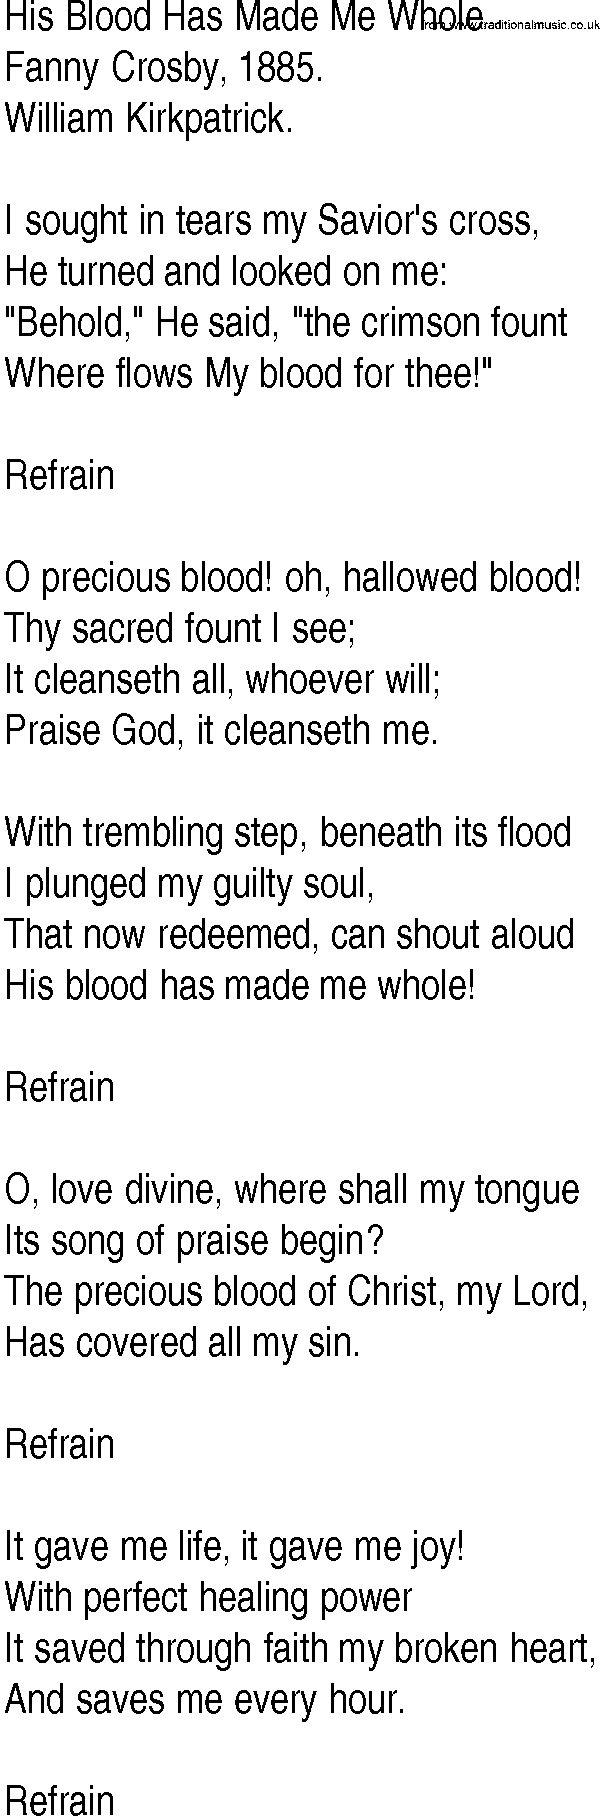 Hymn and Gospel Song: His Blood Has Made Me Whole by Fanny Crosby lyrics